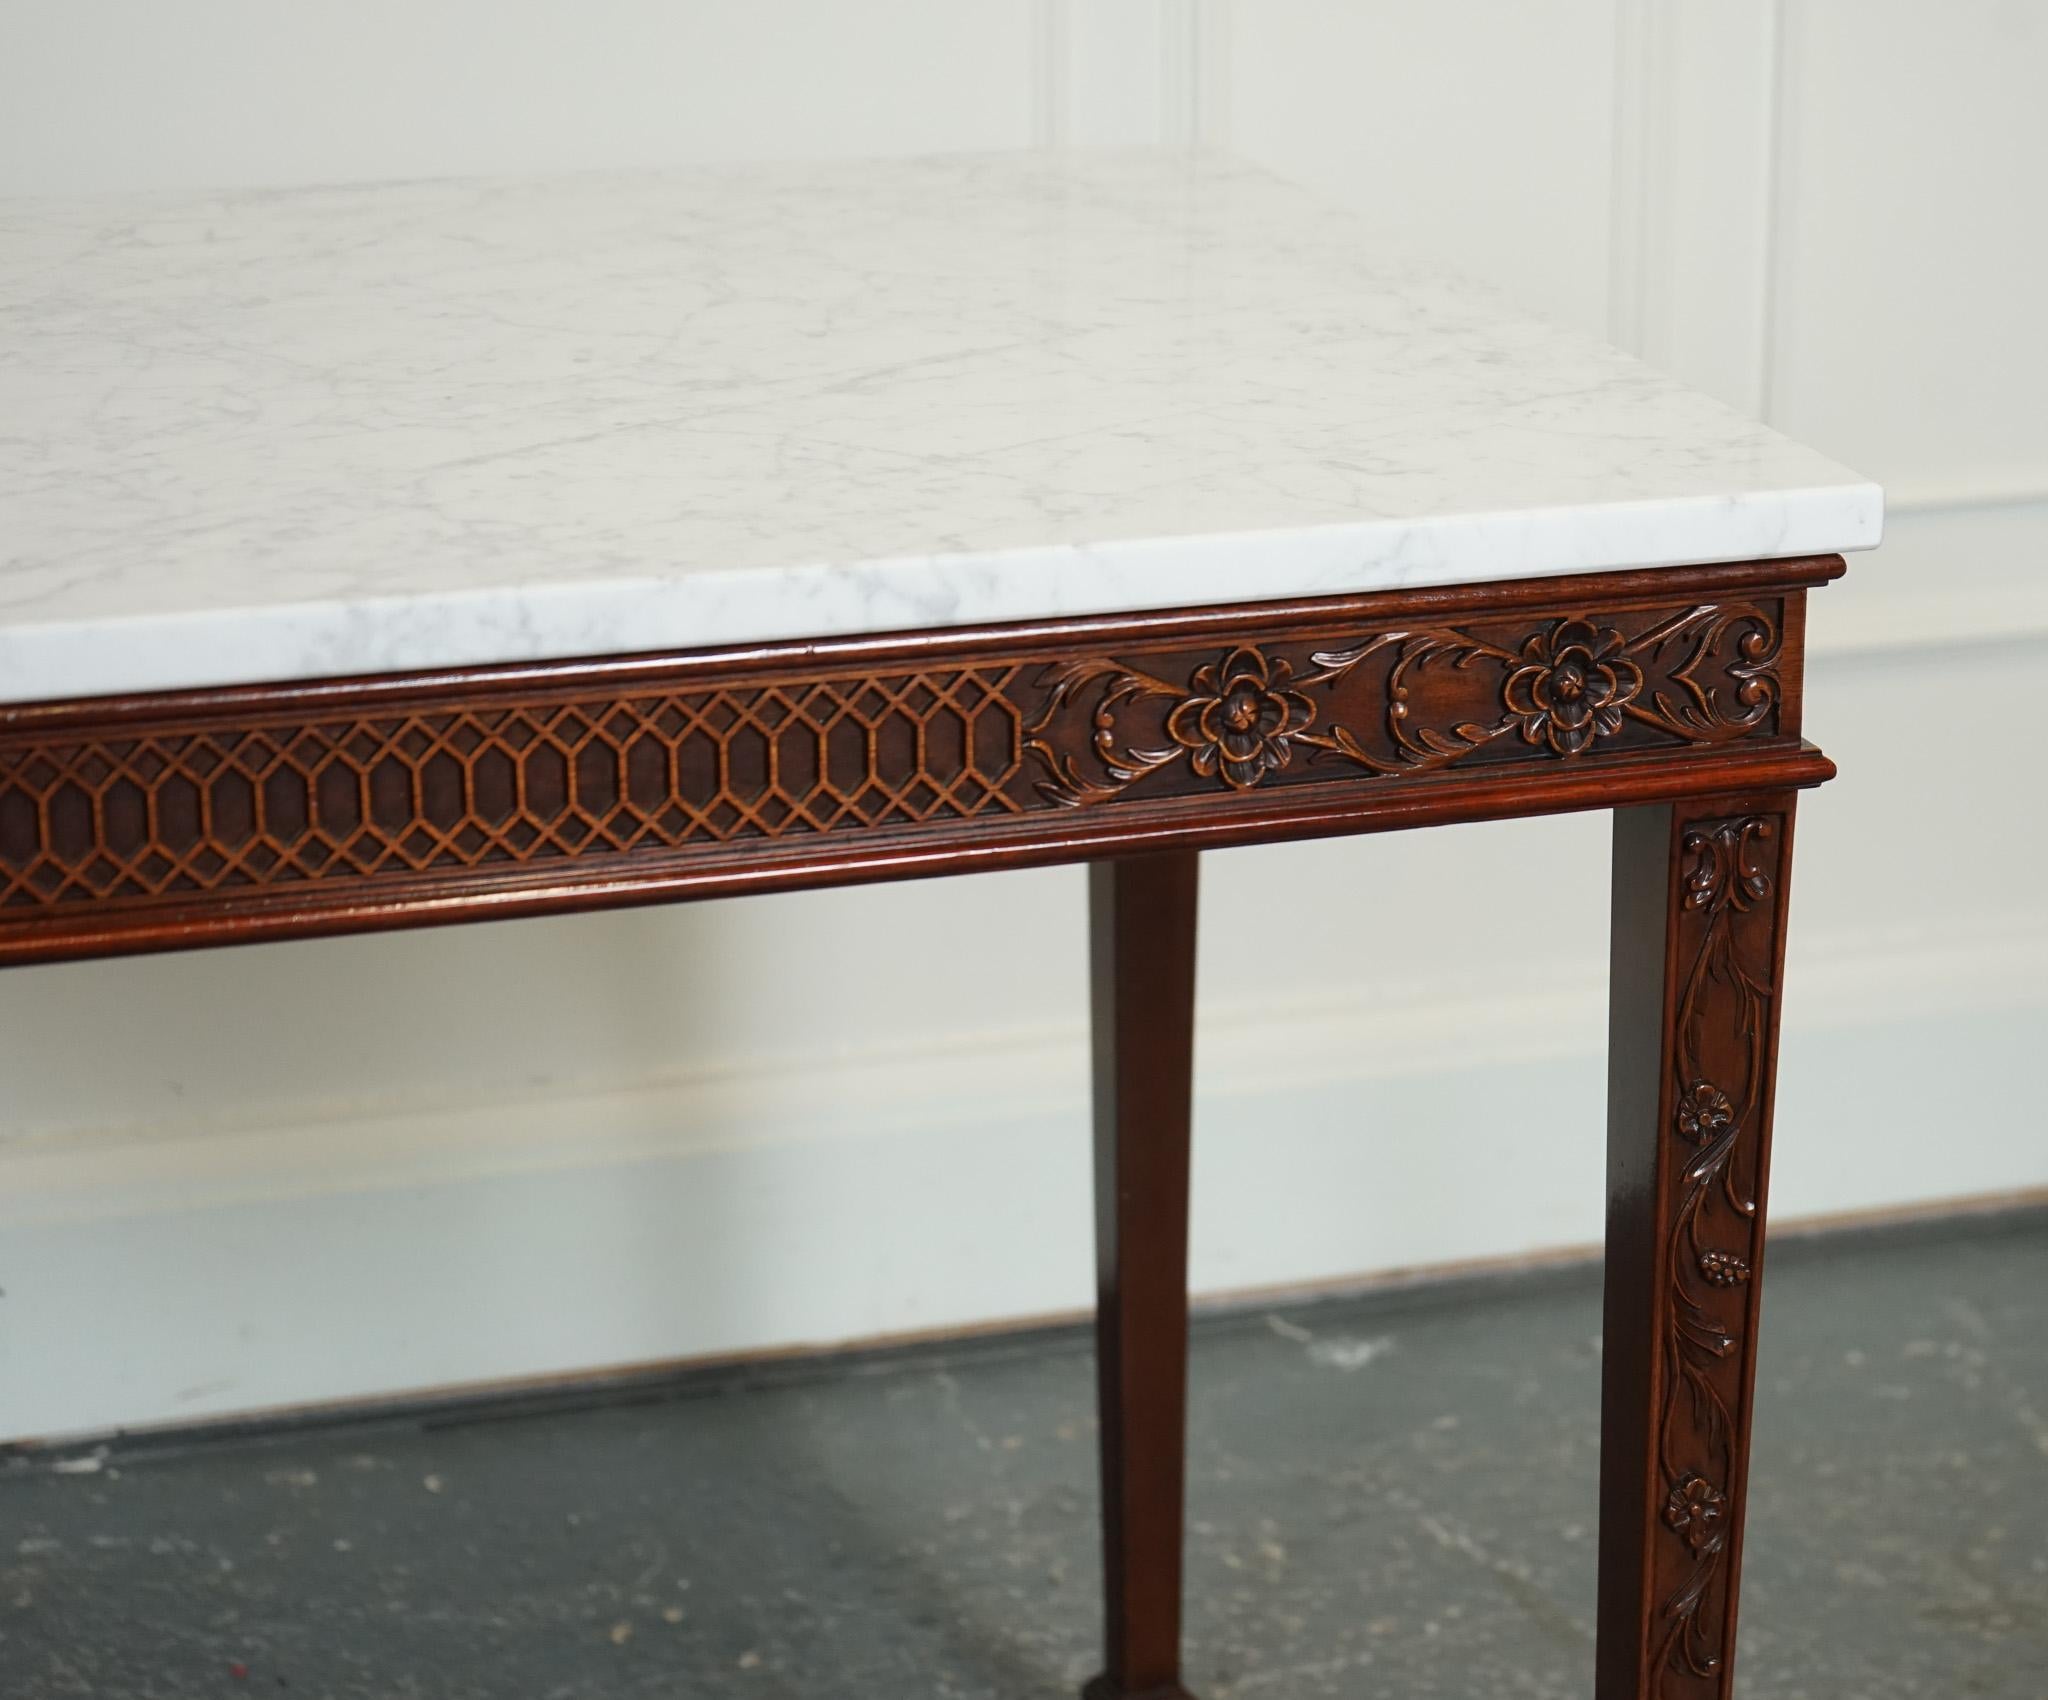 PAiR OF CHIPPENDALE STYLE CONSOLE TABLES WITH NEW WHITE CARRARA MARBLE TOPS In Good Condition For Sale In Pulborough, GB